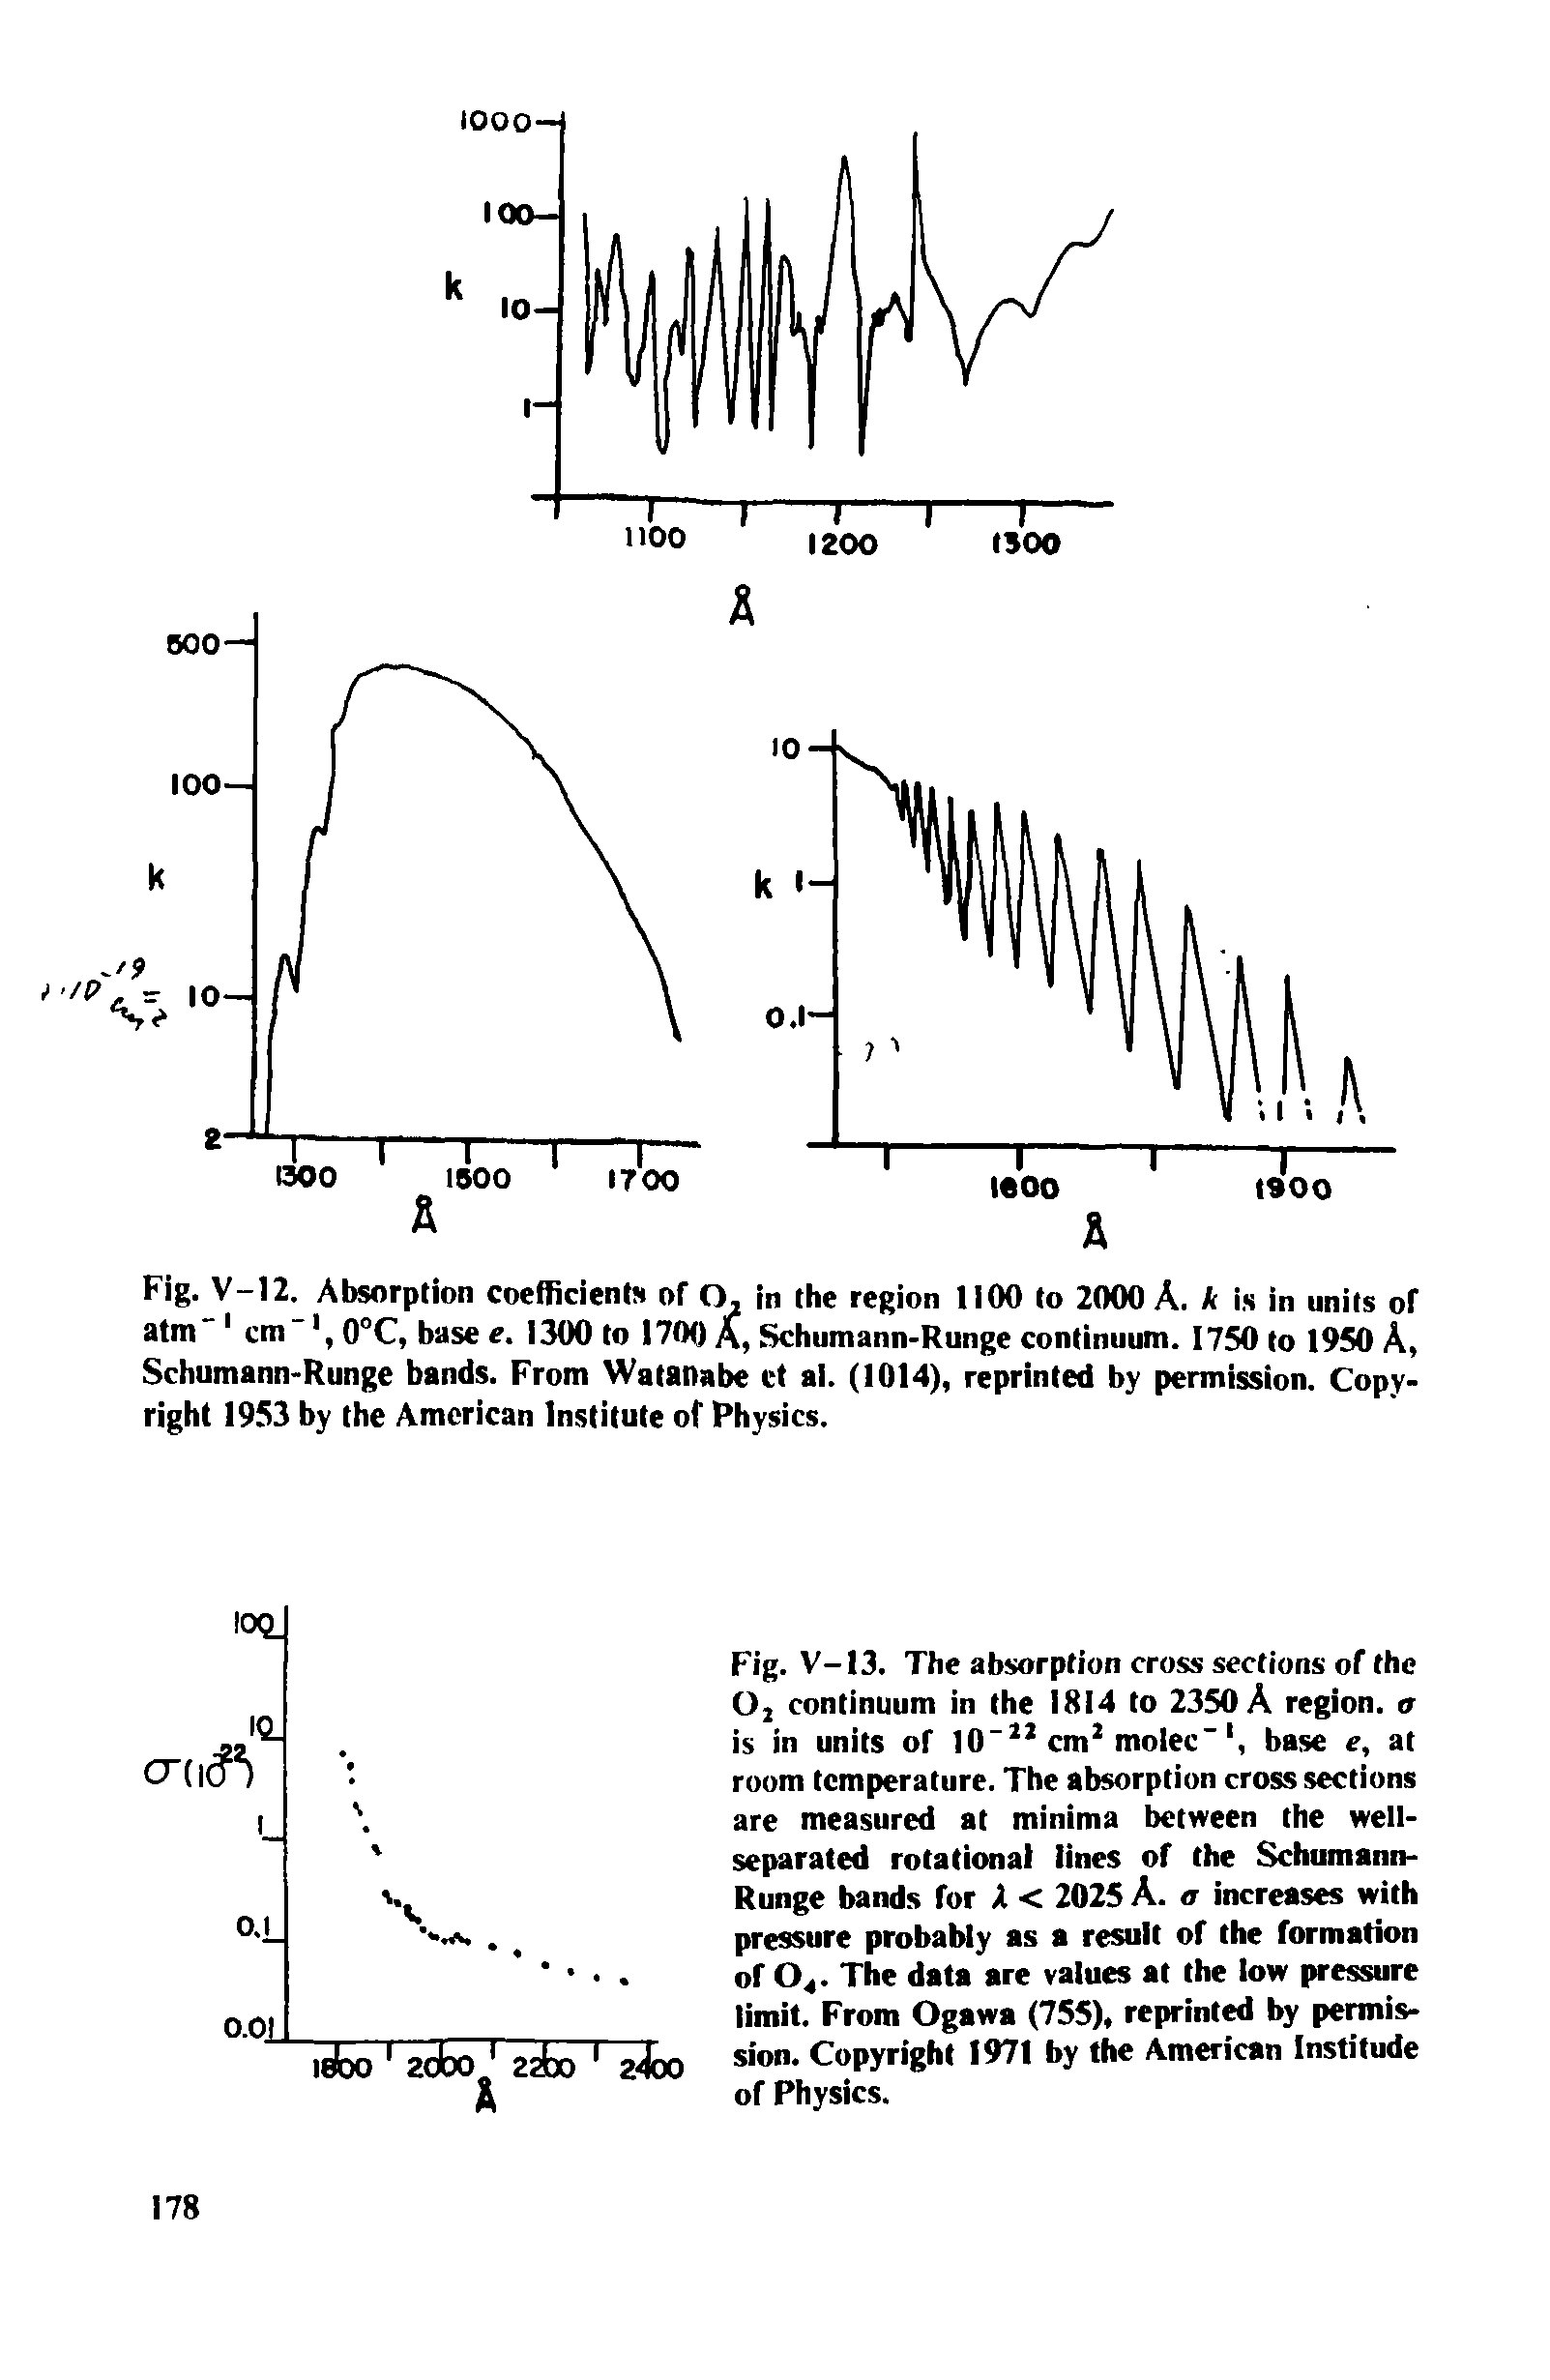 Fig. V-12. Absorption coefficients of O, in the region 1100 to 2000 A. k is in units of atm em 0°C, base e. 1300 to 1700 A, Schumann-Runge continuum. 1750 to 1950 A, Schumann-Runge bands. From Watanabe c al. (1014), reprinted by permission. Copyright 1953 by the American Institute of Physics.